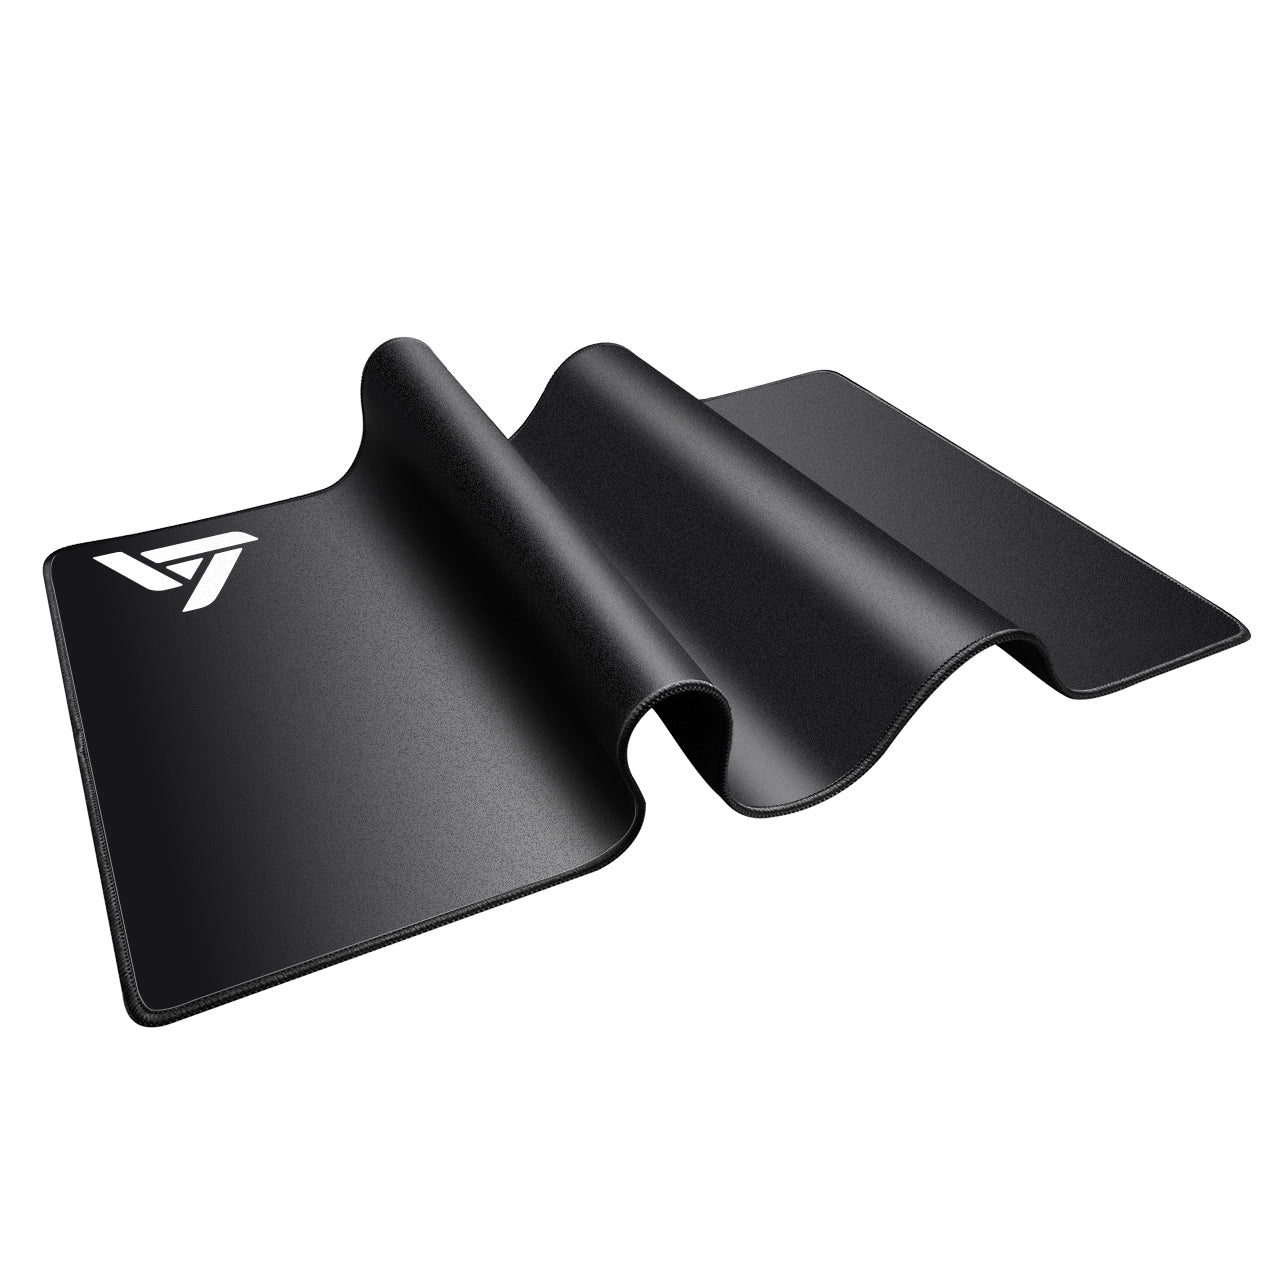 VicTsing Gaming Mouse Mat Large Size (800×400×2.5mm) Extended Mouse Pad Water-Resistant Mouse Pad with Non-slip Rubber Base, Special-Textured Smooth Surface, Durable Stitched Edges, Support for Computer, PC and Laptop - Black